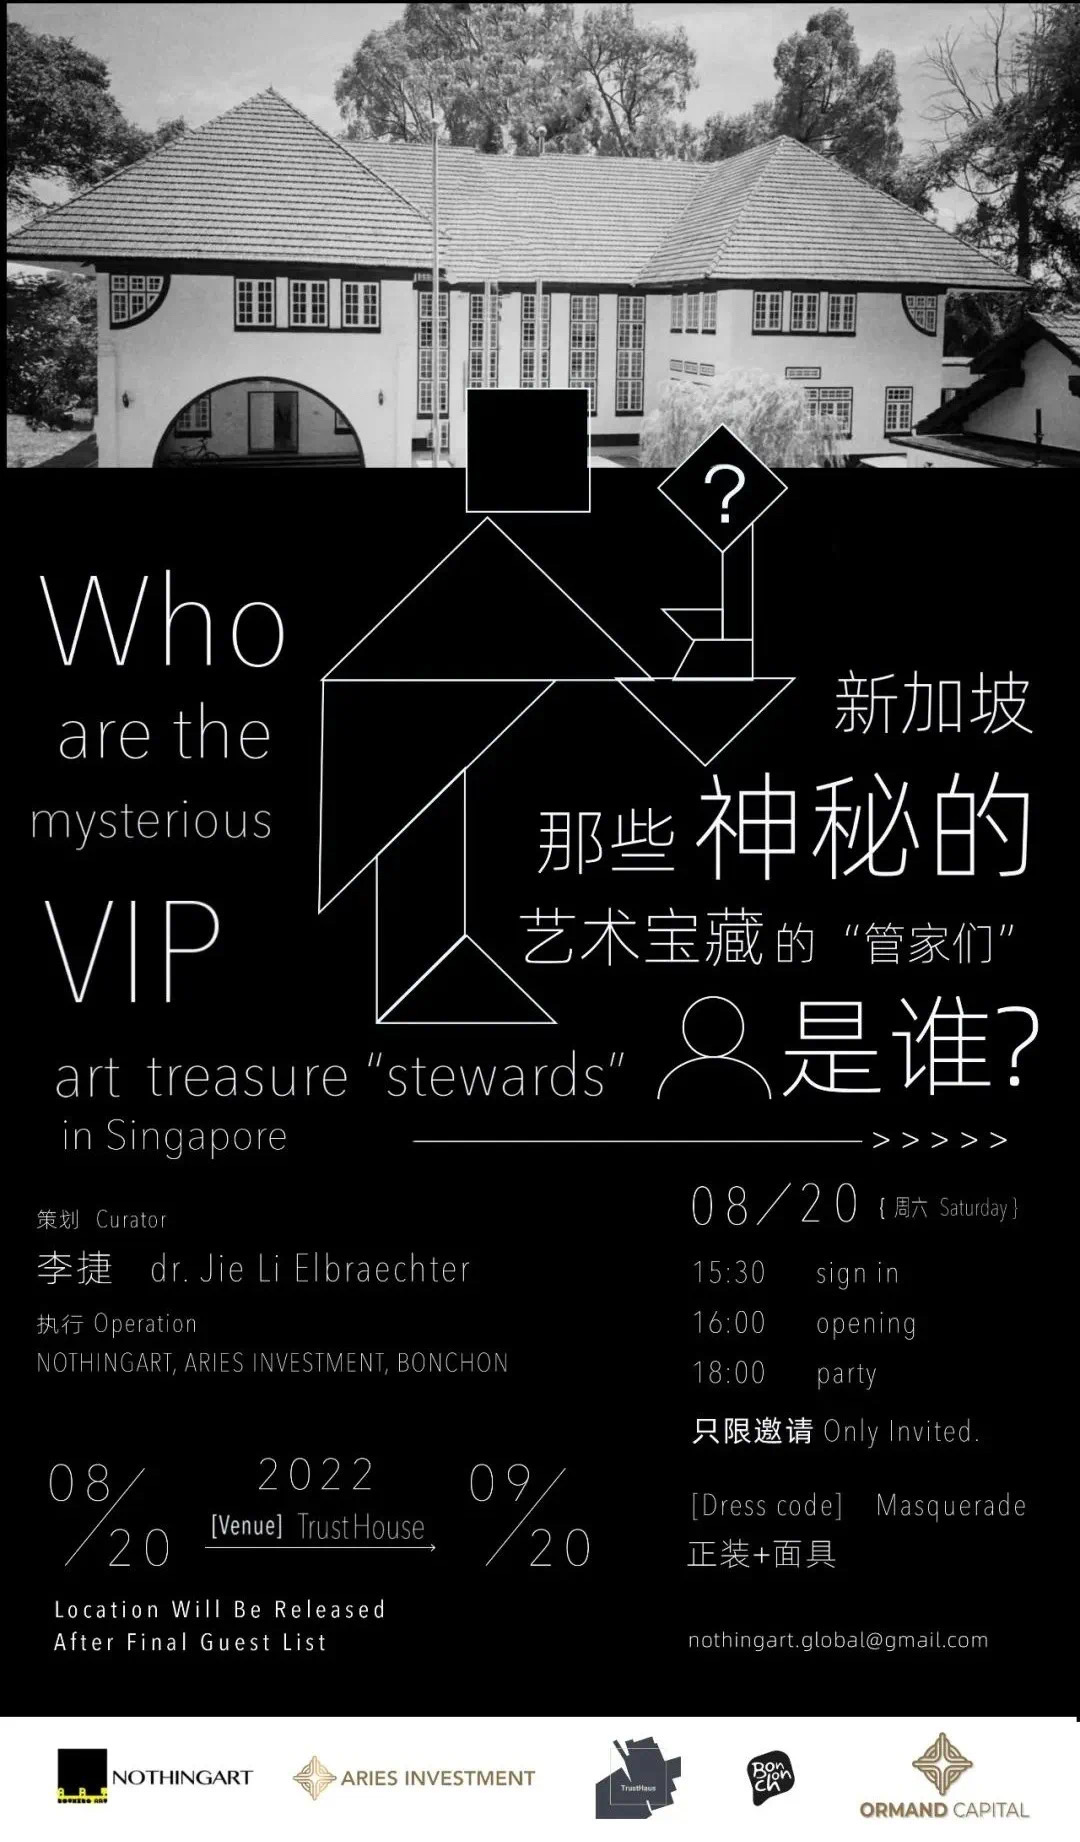 Who are the mysterious VIP art treasure “stewards” in Singapore ？